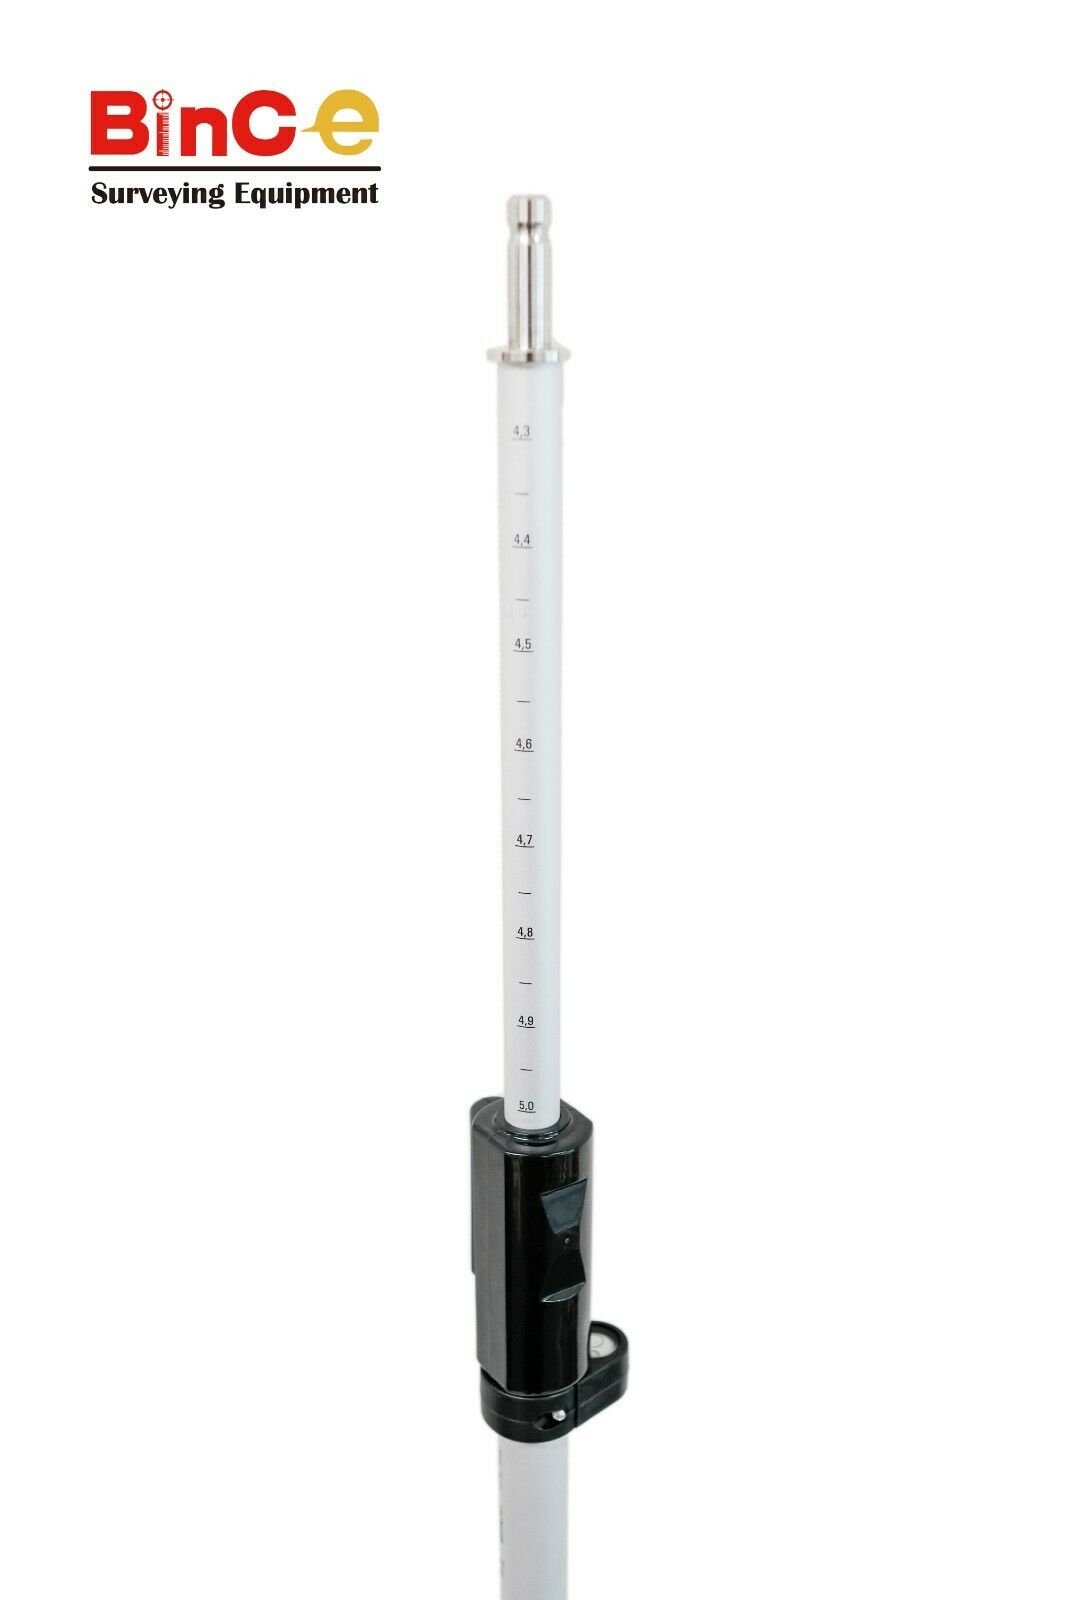 Leica Type 2.15M Telescopic Reflector Prism Pole for Leica Total Station Survey